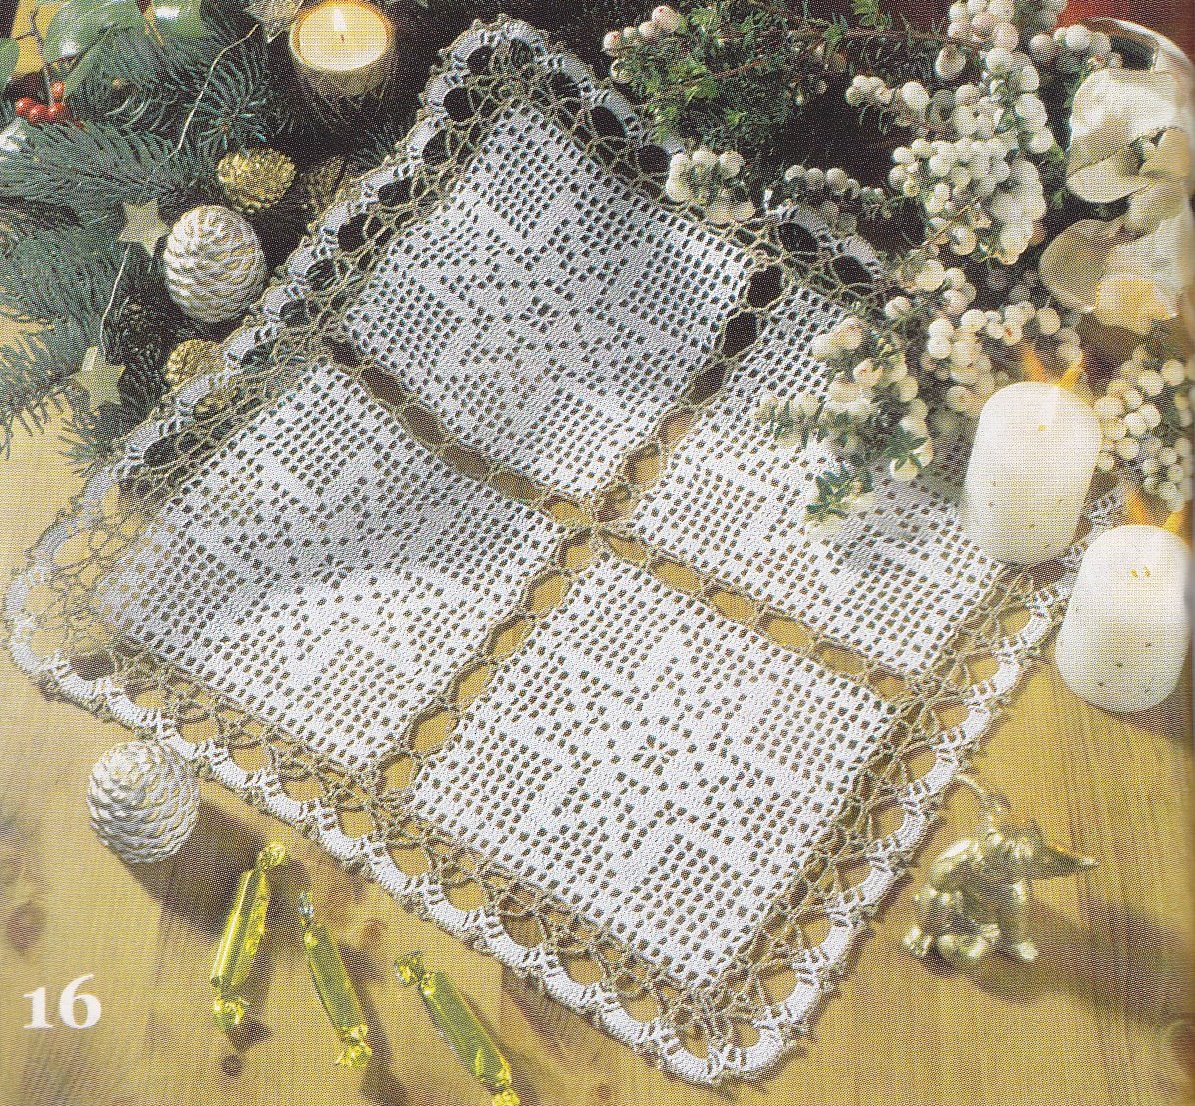 doily tiled with stars (1)